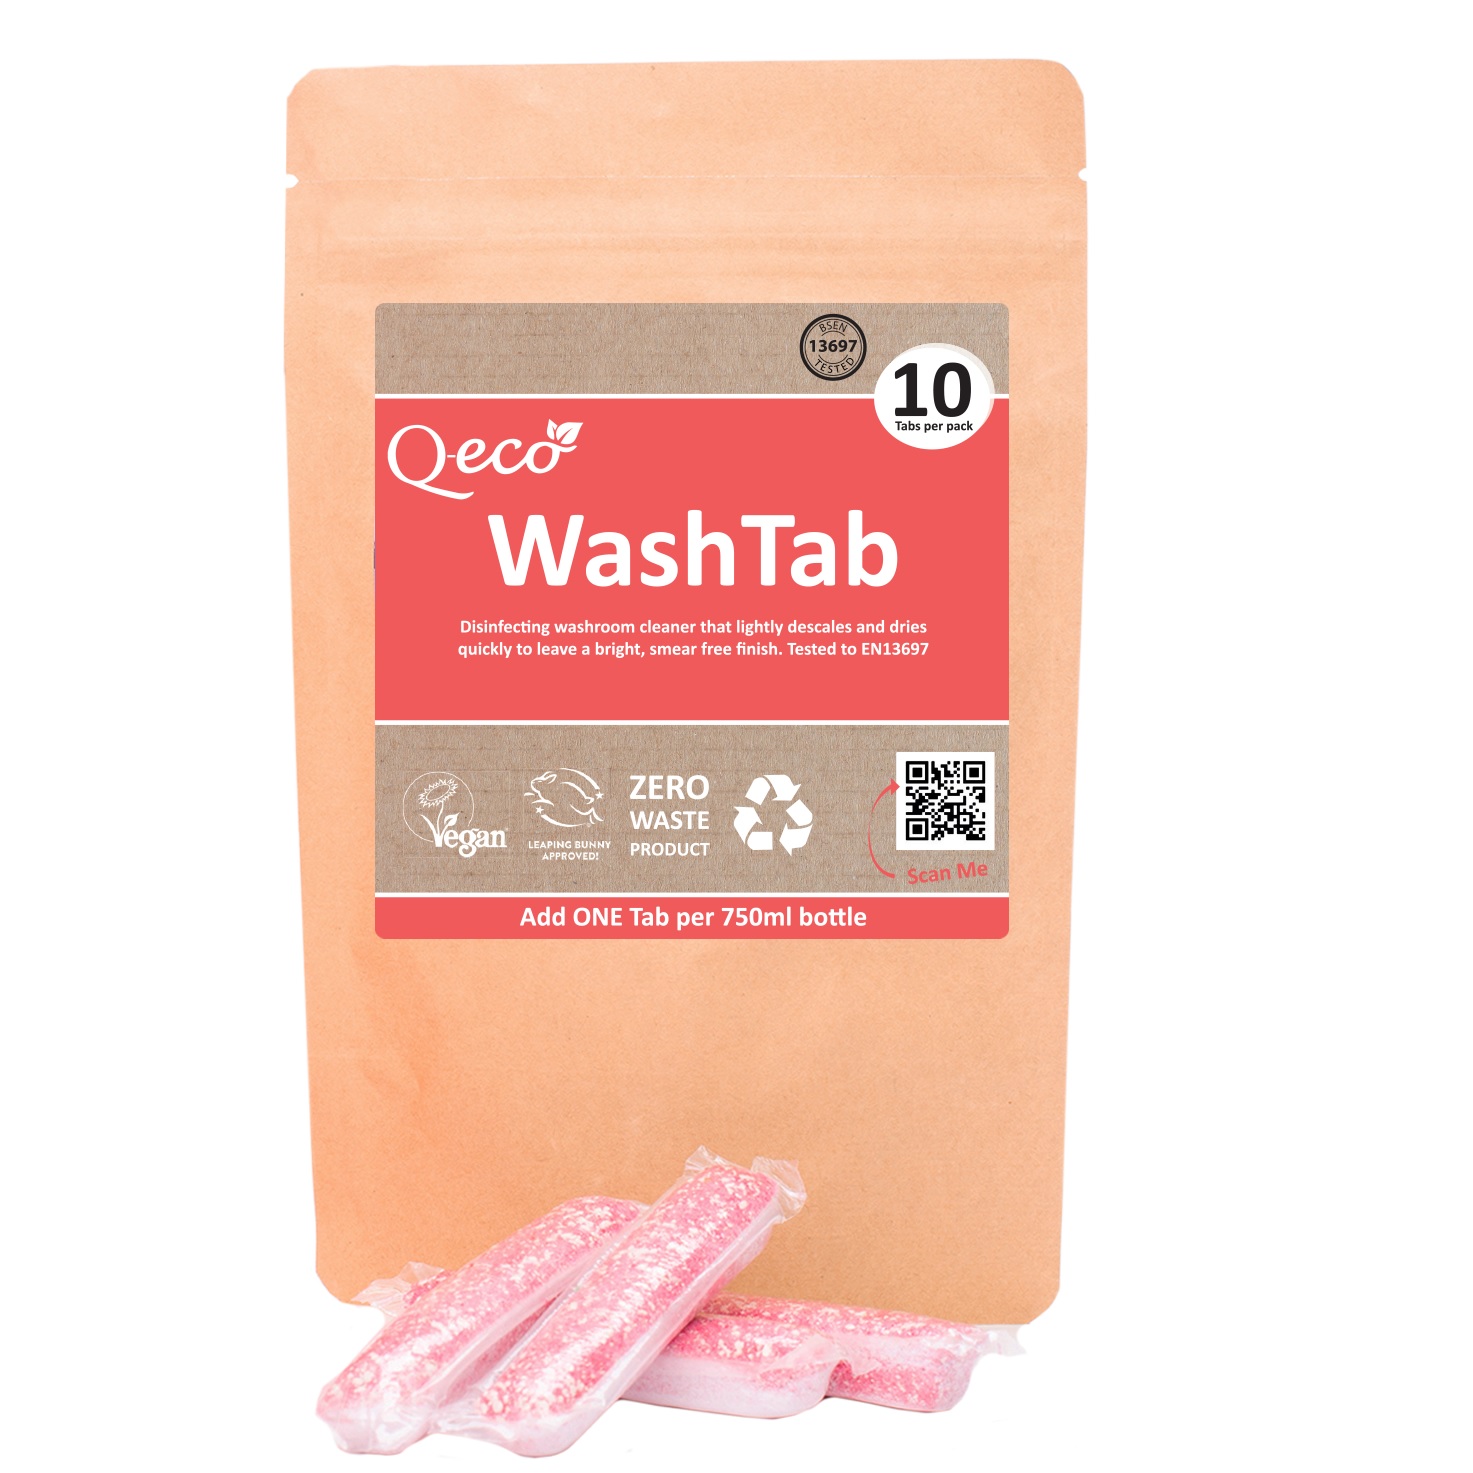 Q-Eco-WashTab--Disinfecting-Washroom-Cleaning-Tabs--Pack-of-10--